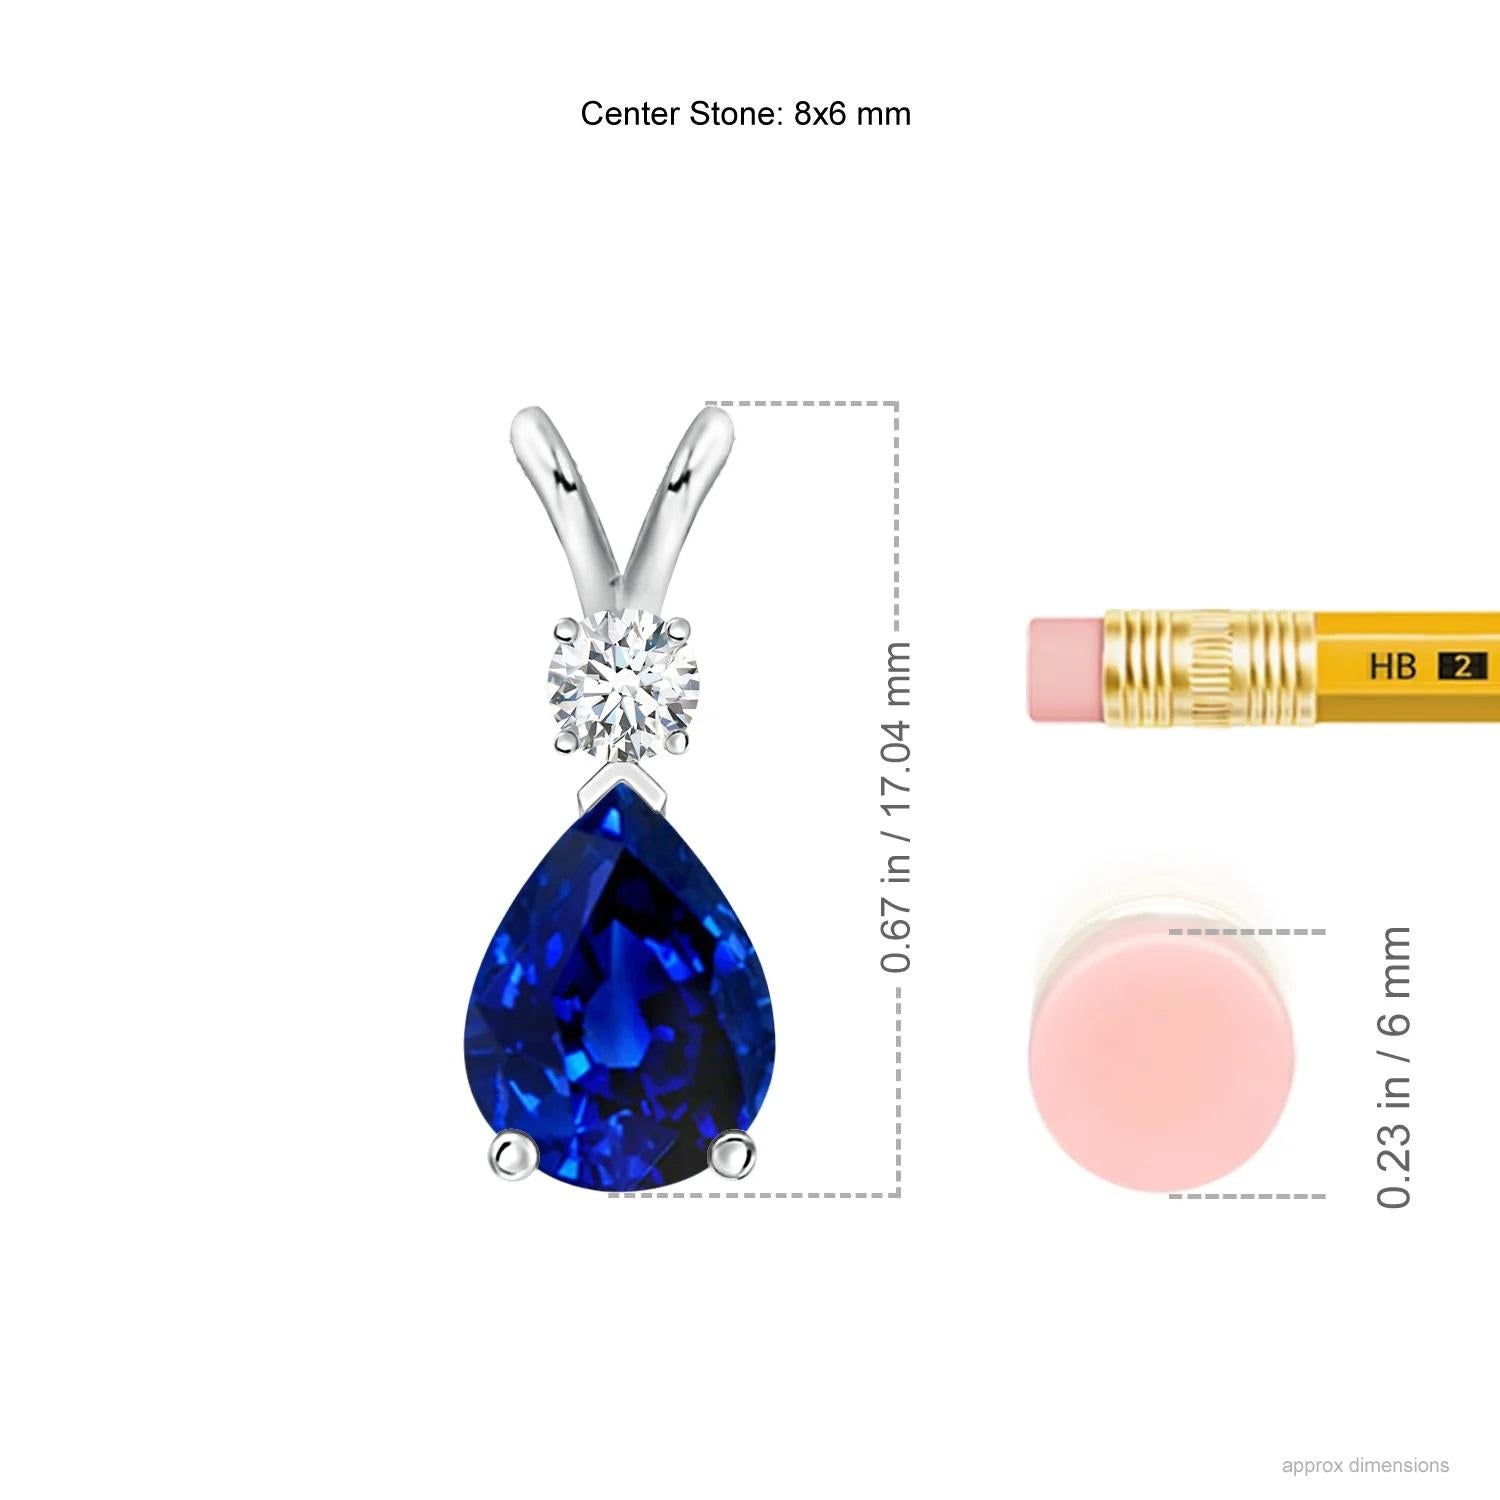 This classic solitaire pendant features a pear-shaped sapphire secured in a prong setting. A brilliant round diamond sits atop the blue gemstone adding to the design's charm. Simple yet appealing, this sapphire pendant in platinum is crafted with a